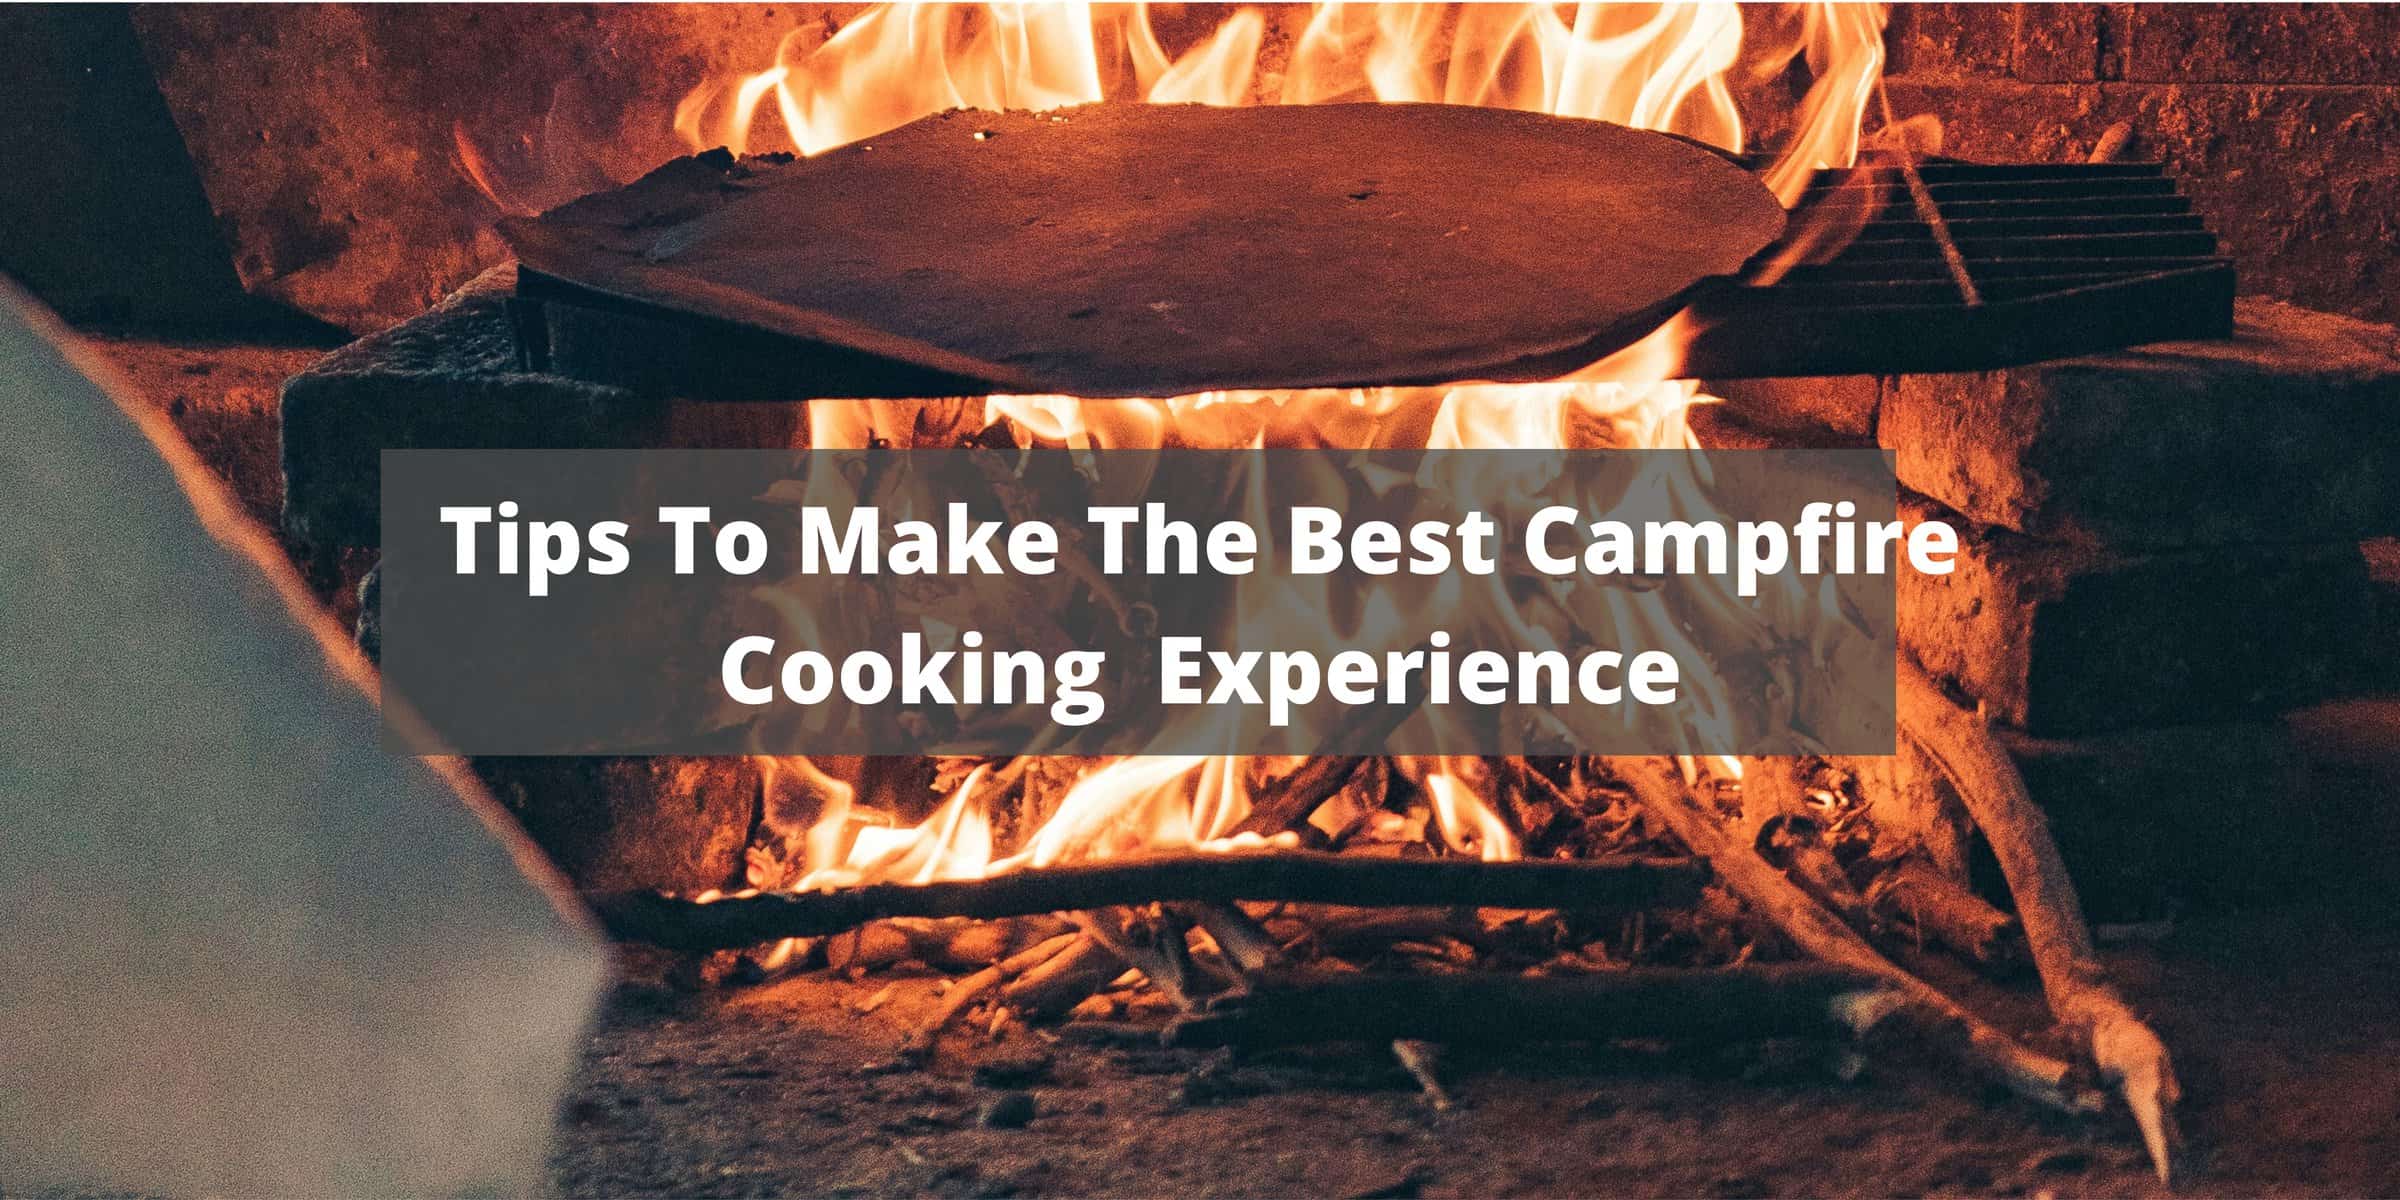 Campfire Cooking: Tips To Make The Best Campfire Experience